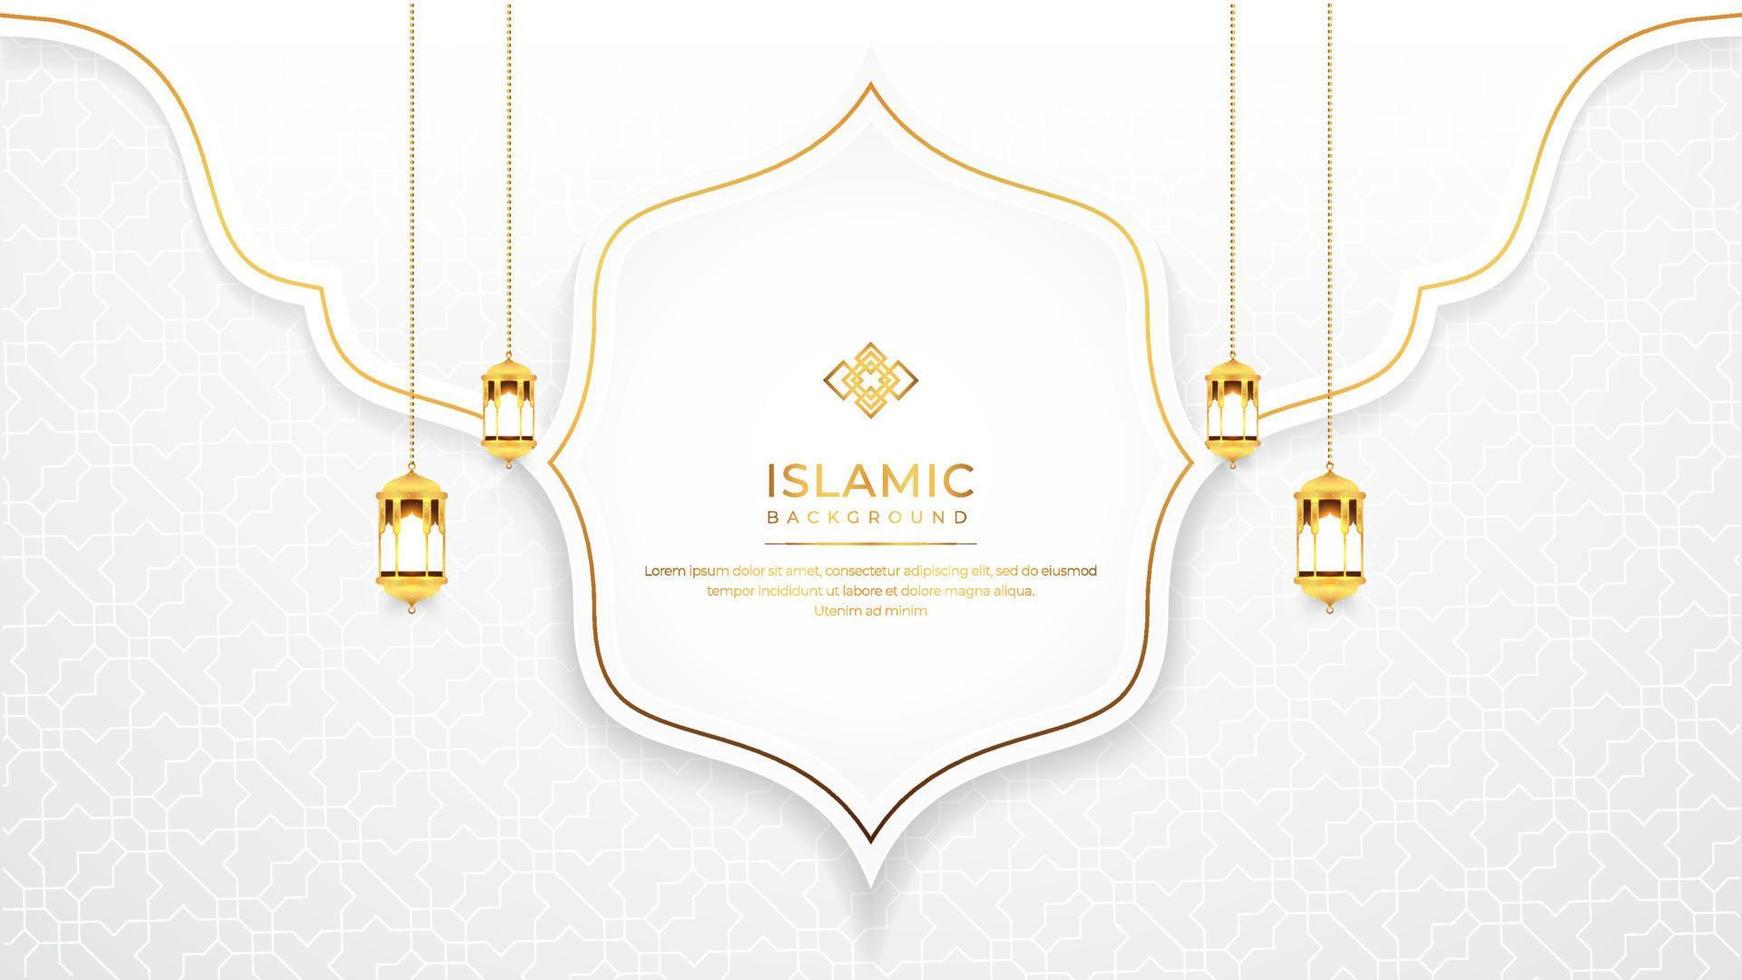 Luxury White and Gold Elegant Greeting Background with Arabic Pattern, Islamic Border, and Decorative Hanging Lanterns Ornament for banner, background, wallpaper, decoration, cover, vector